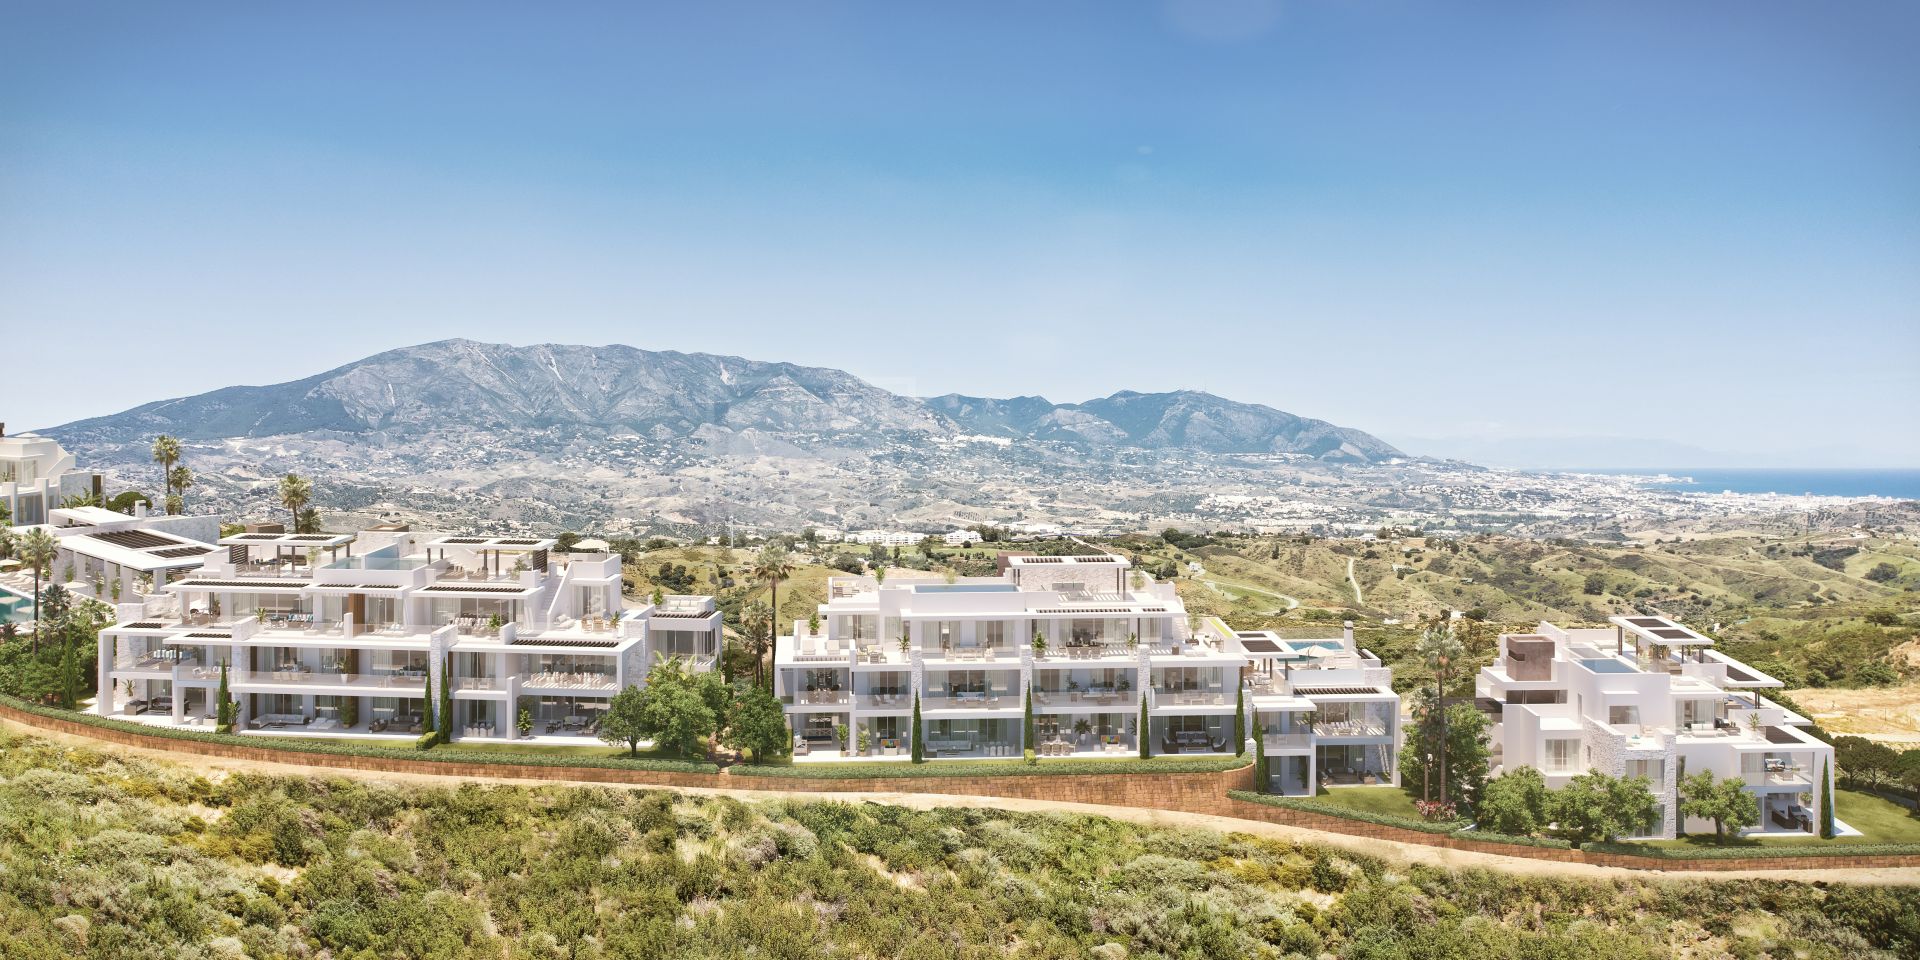 STRIKING NEW CONTEMPORARY 2-BEDROOM APARTMENT IN SELECT DEVELOPMENT EAST MARBELLA